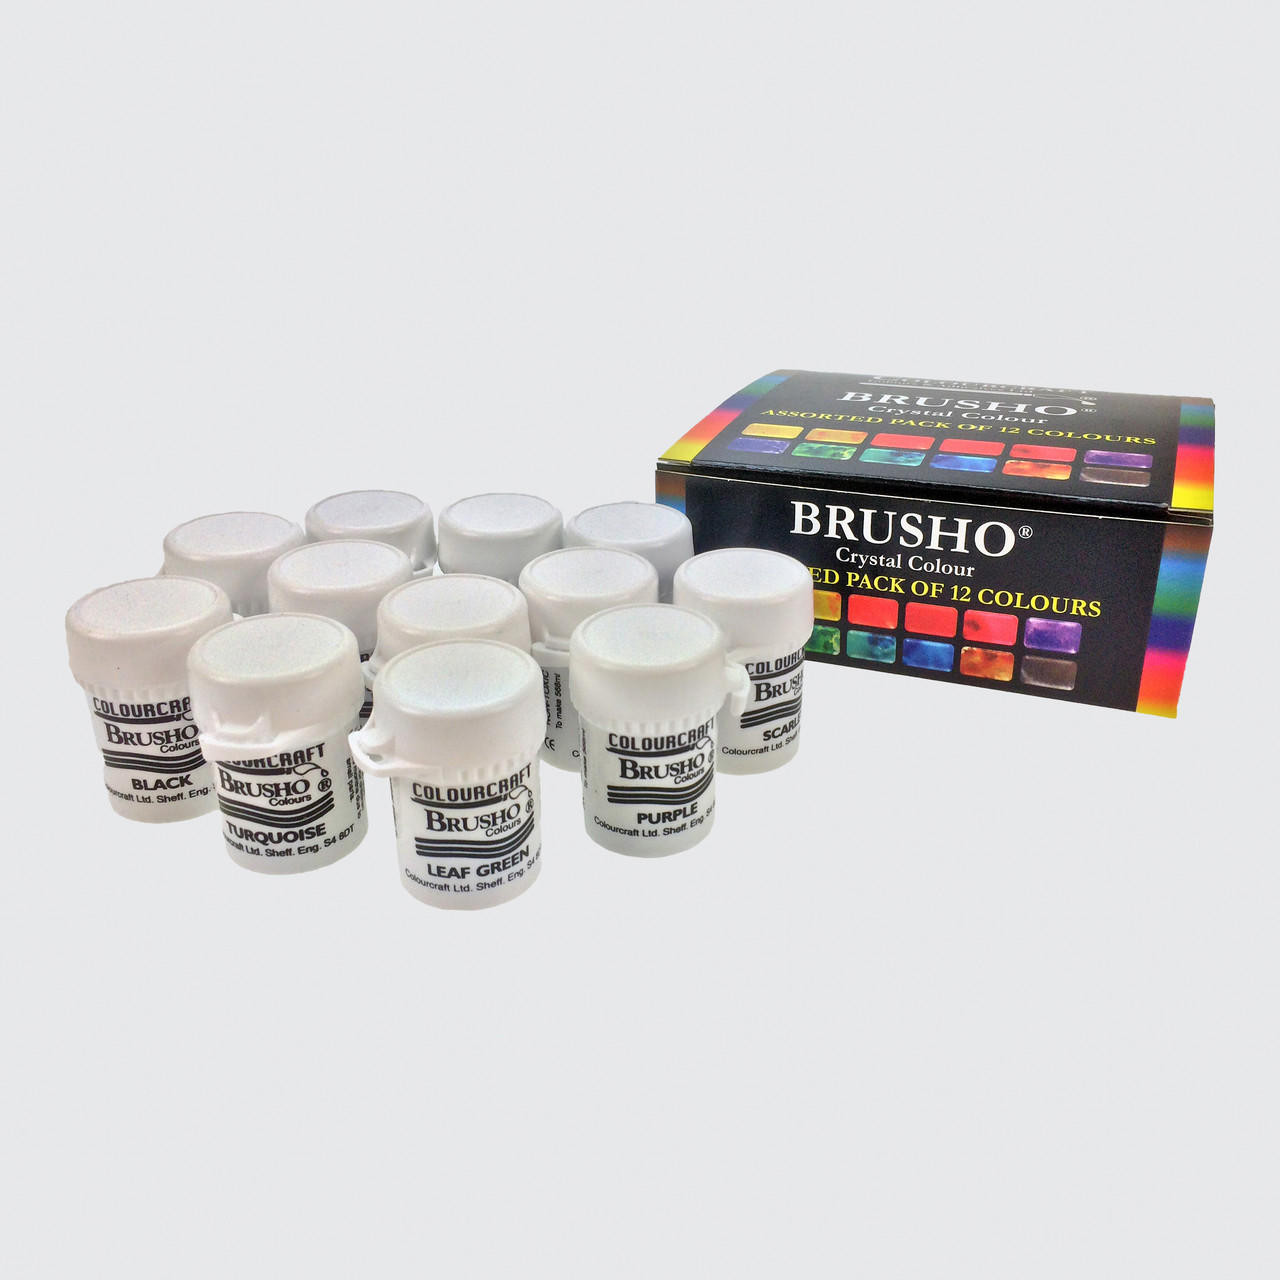 Brusho Paint Crystals 15g Assorted Colours Set of 12